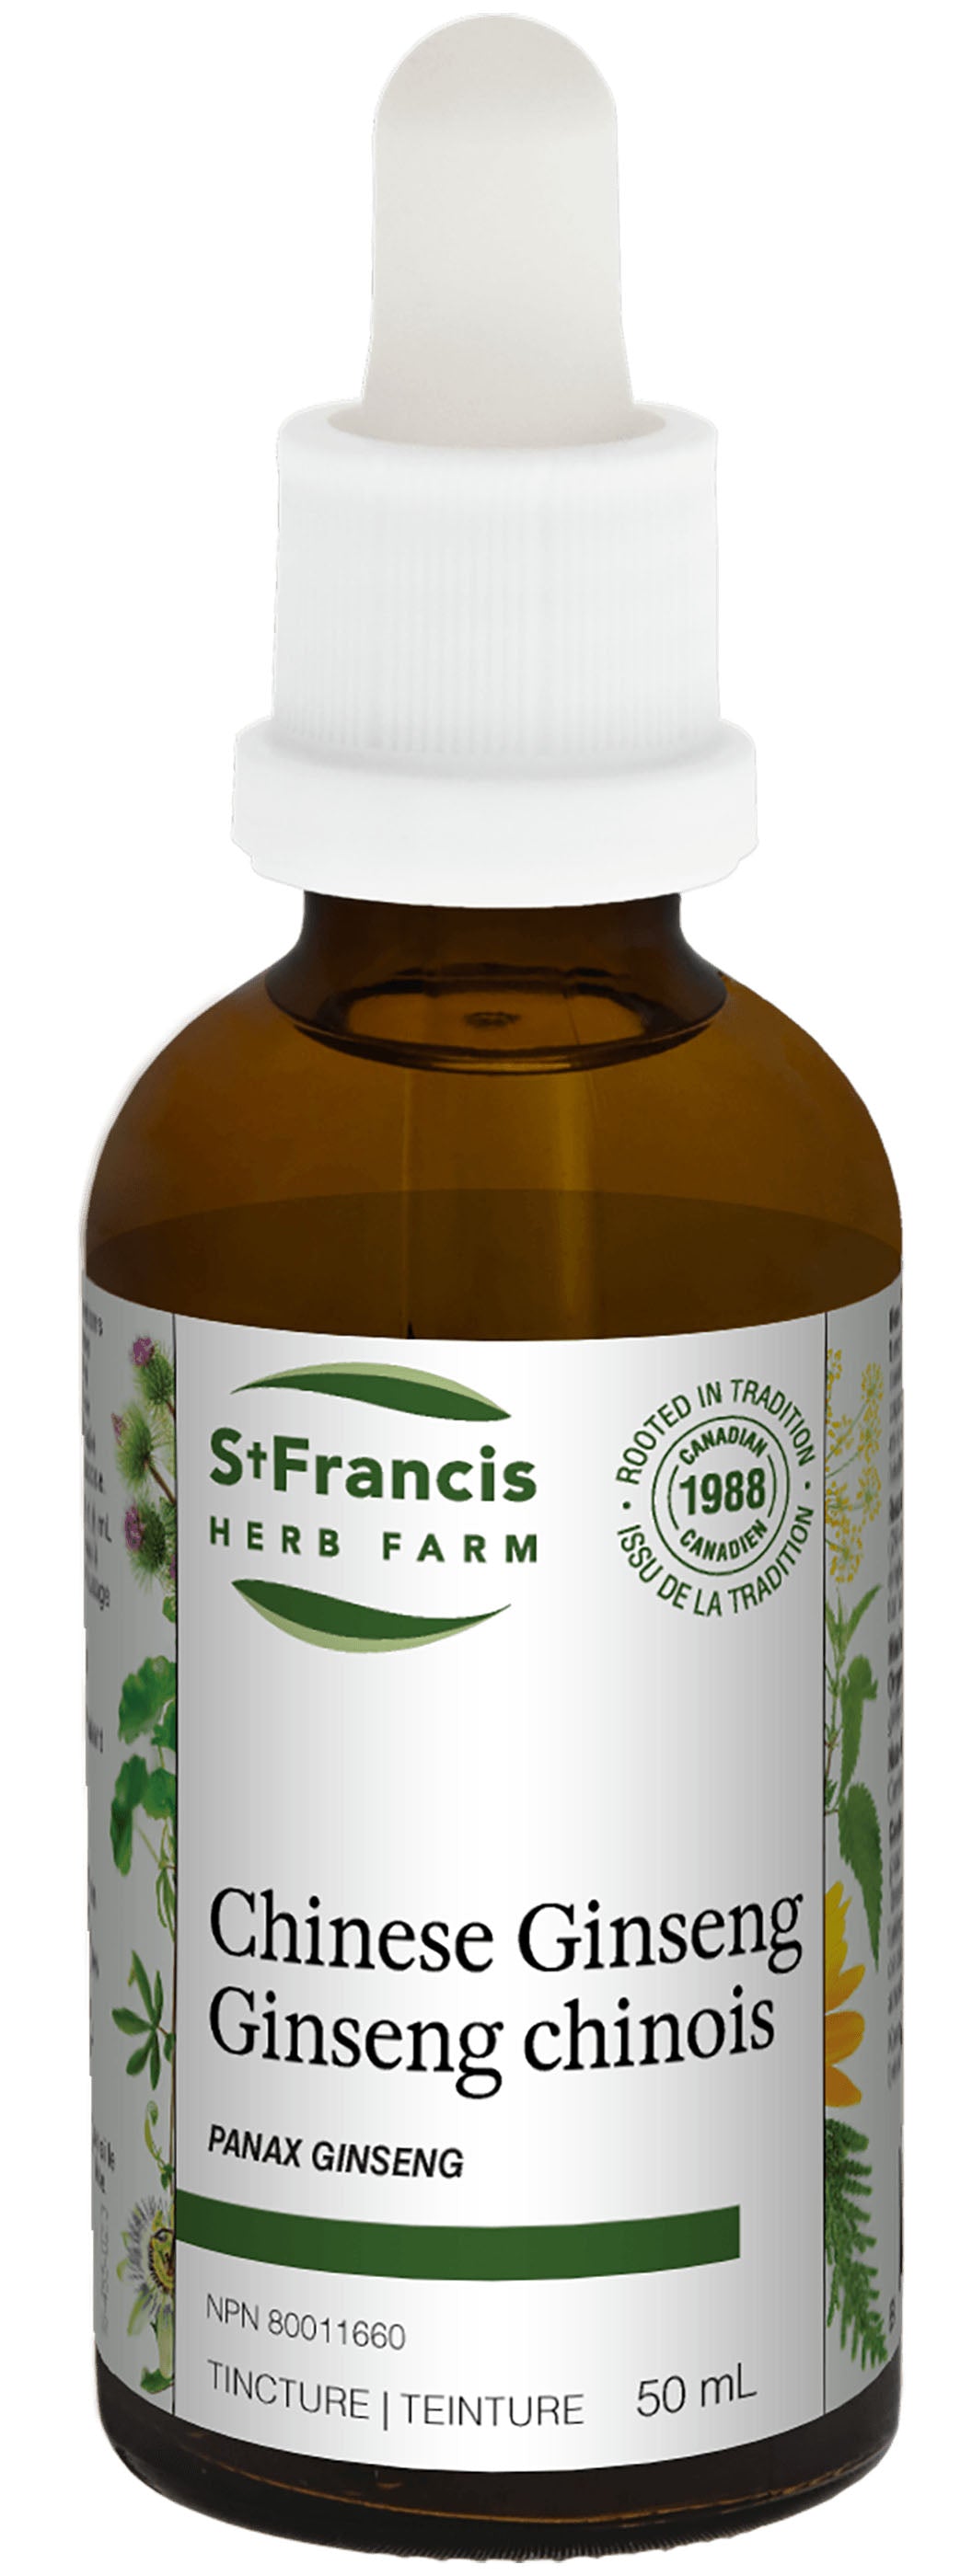 ST FRANCIS HERB FARM Chinese Ginseng (50 ml)